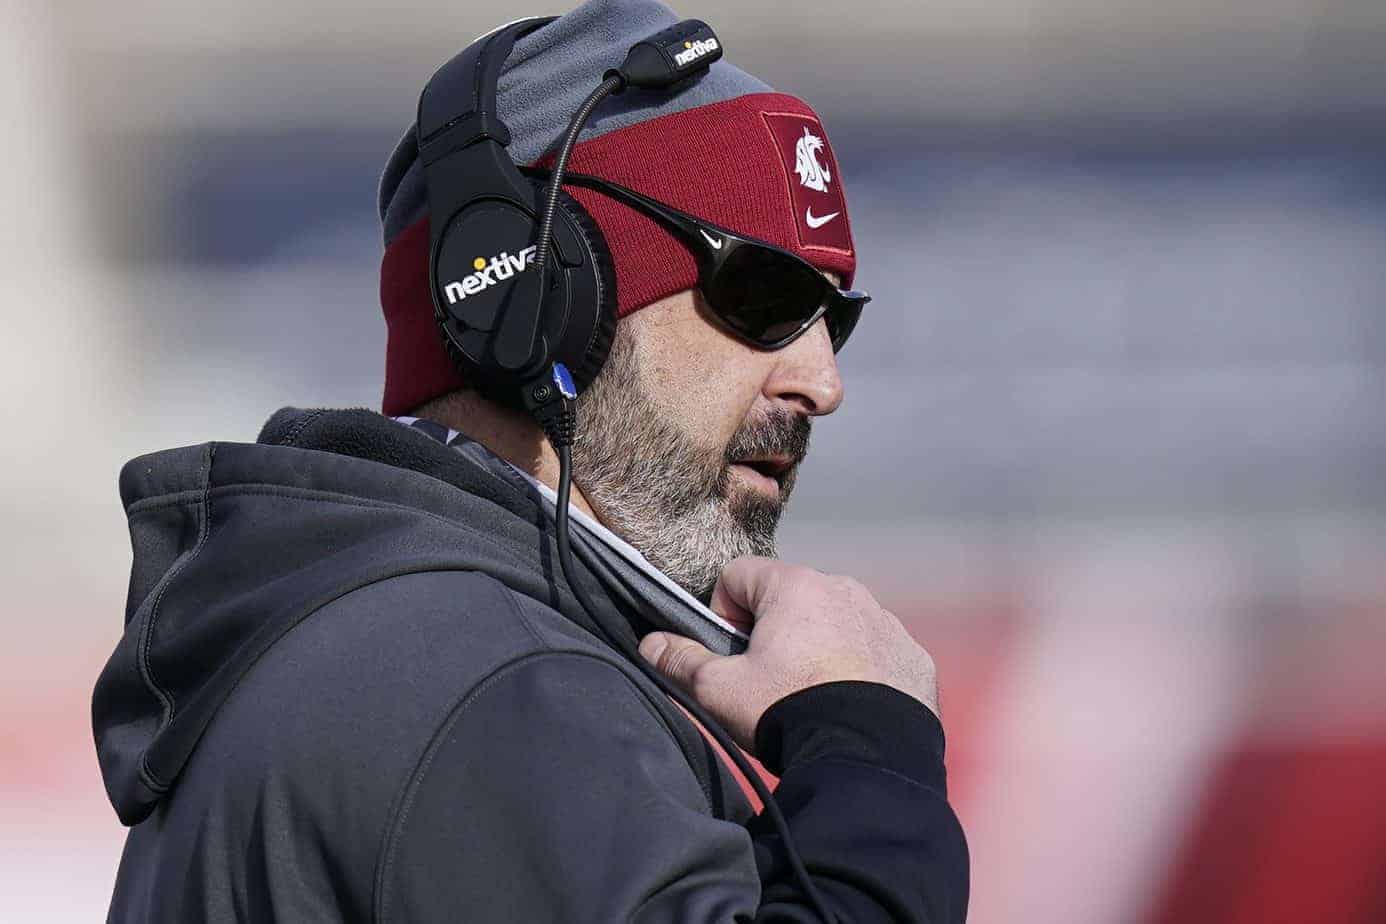 Washington State head coach Nick Rolovich announced his decision not to take the COVID vaccine, and will be doing media day remotely